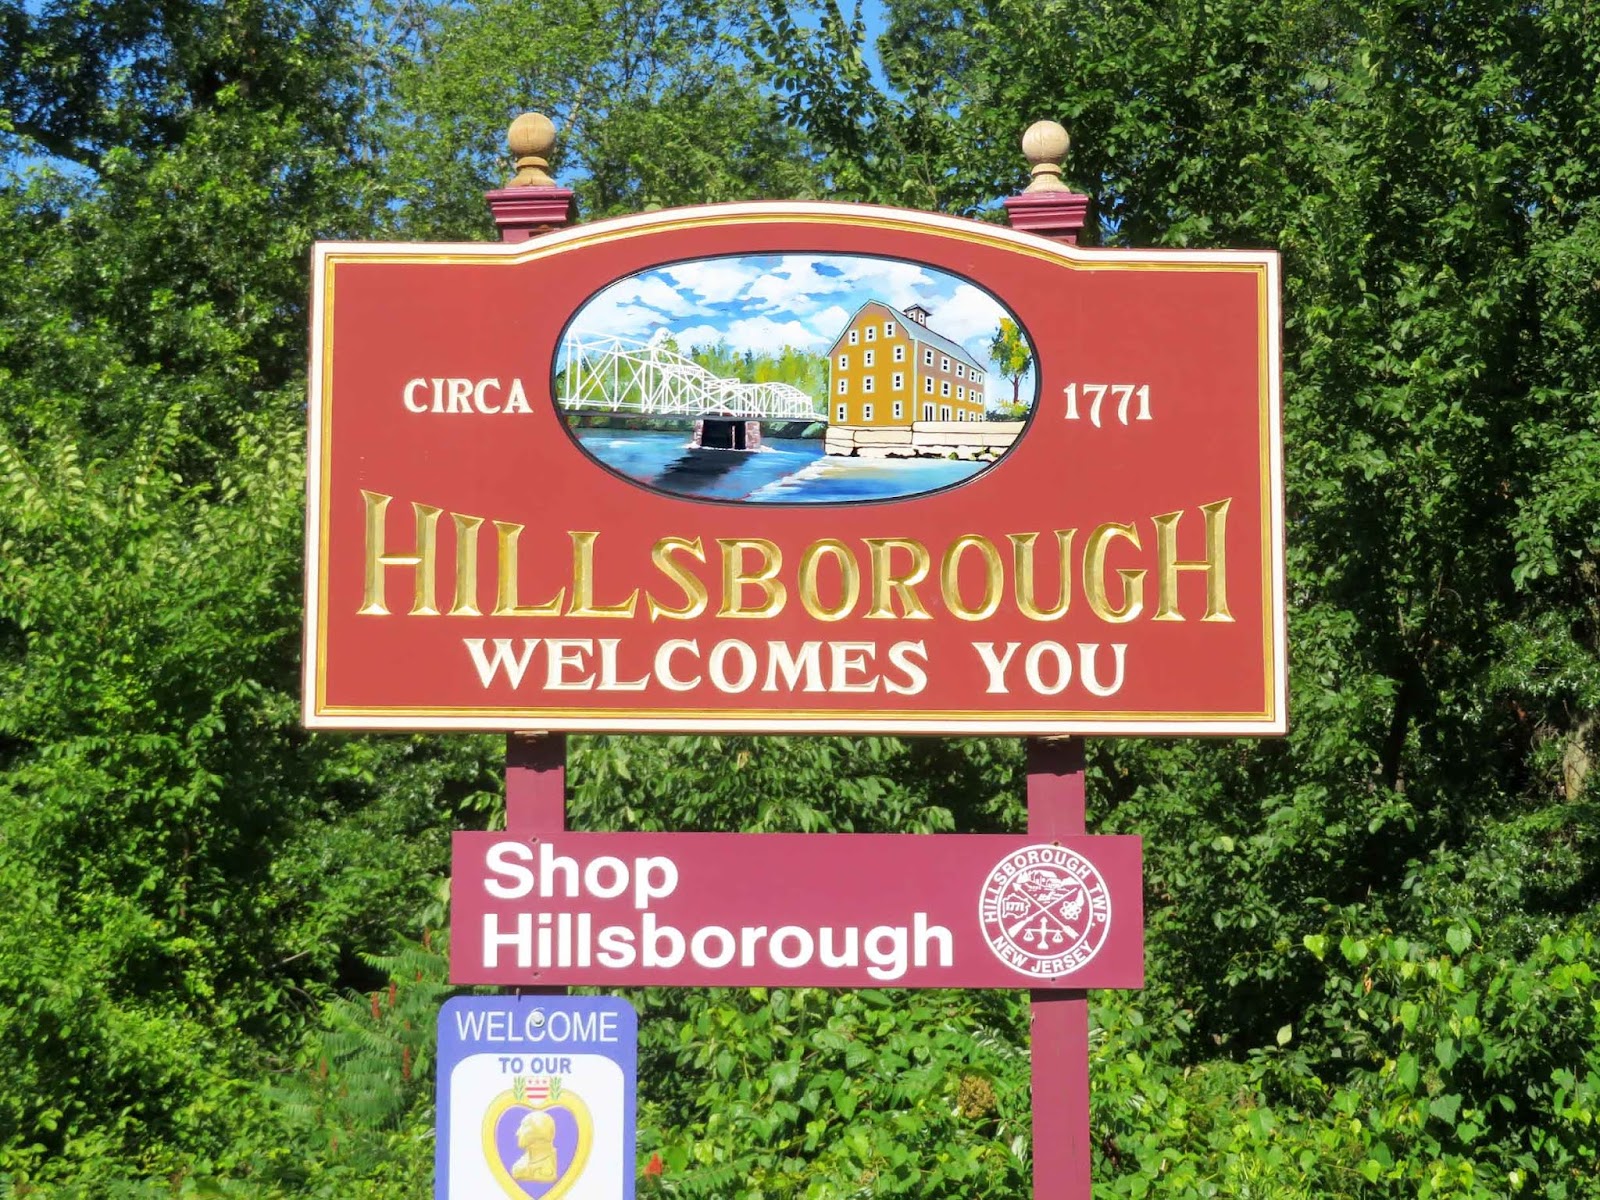 Historical Places to visit in Hillsborough